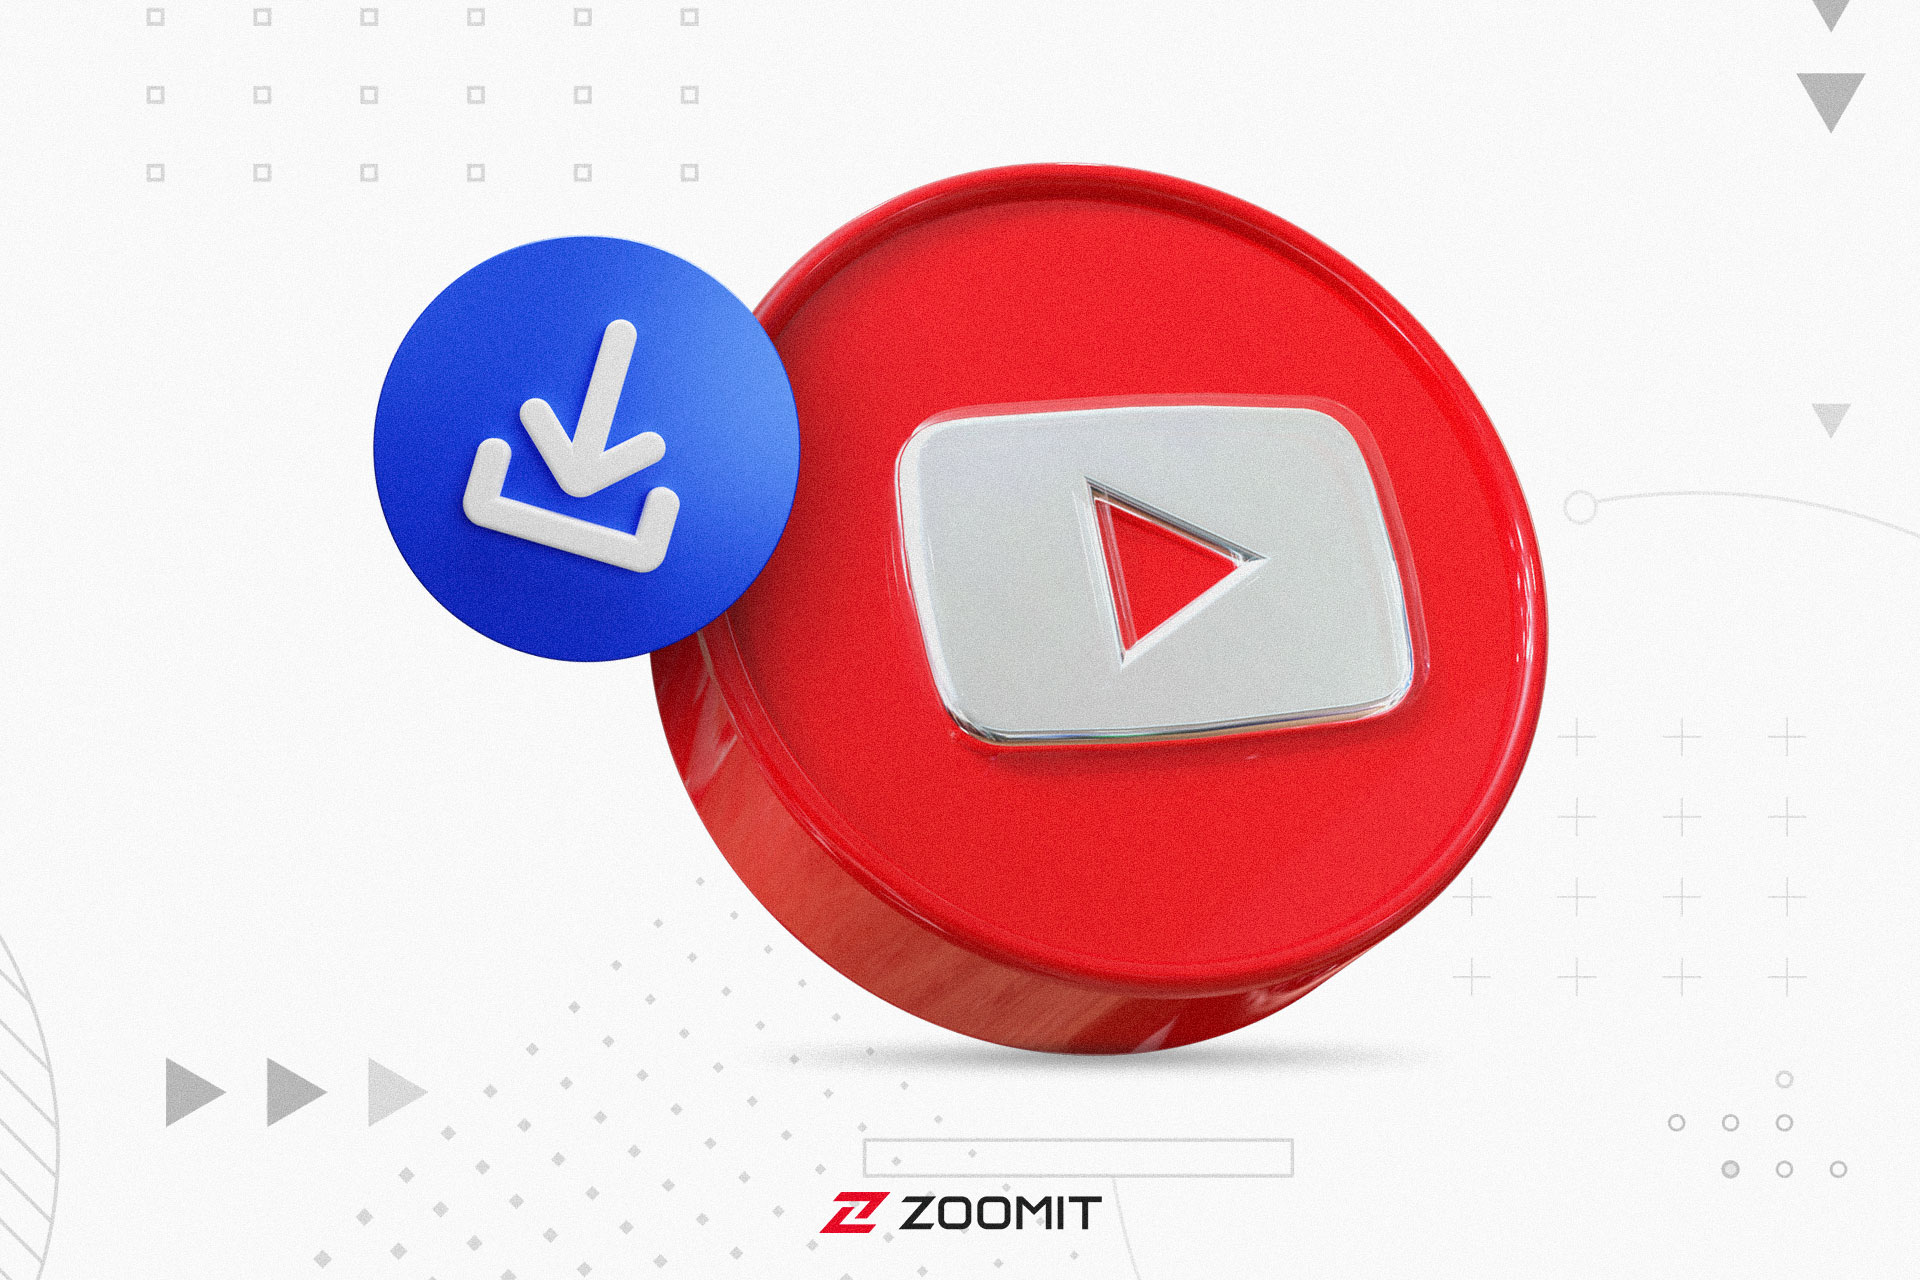 How to download from YouTube / YouTube logo with download icon